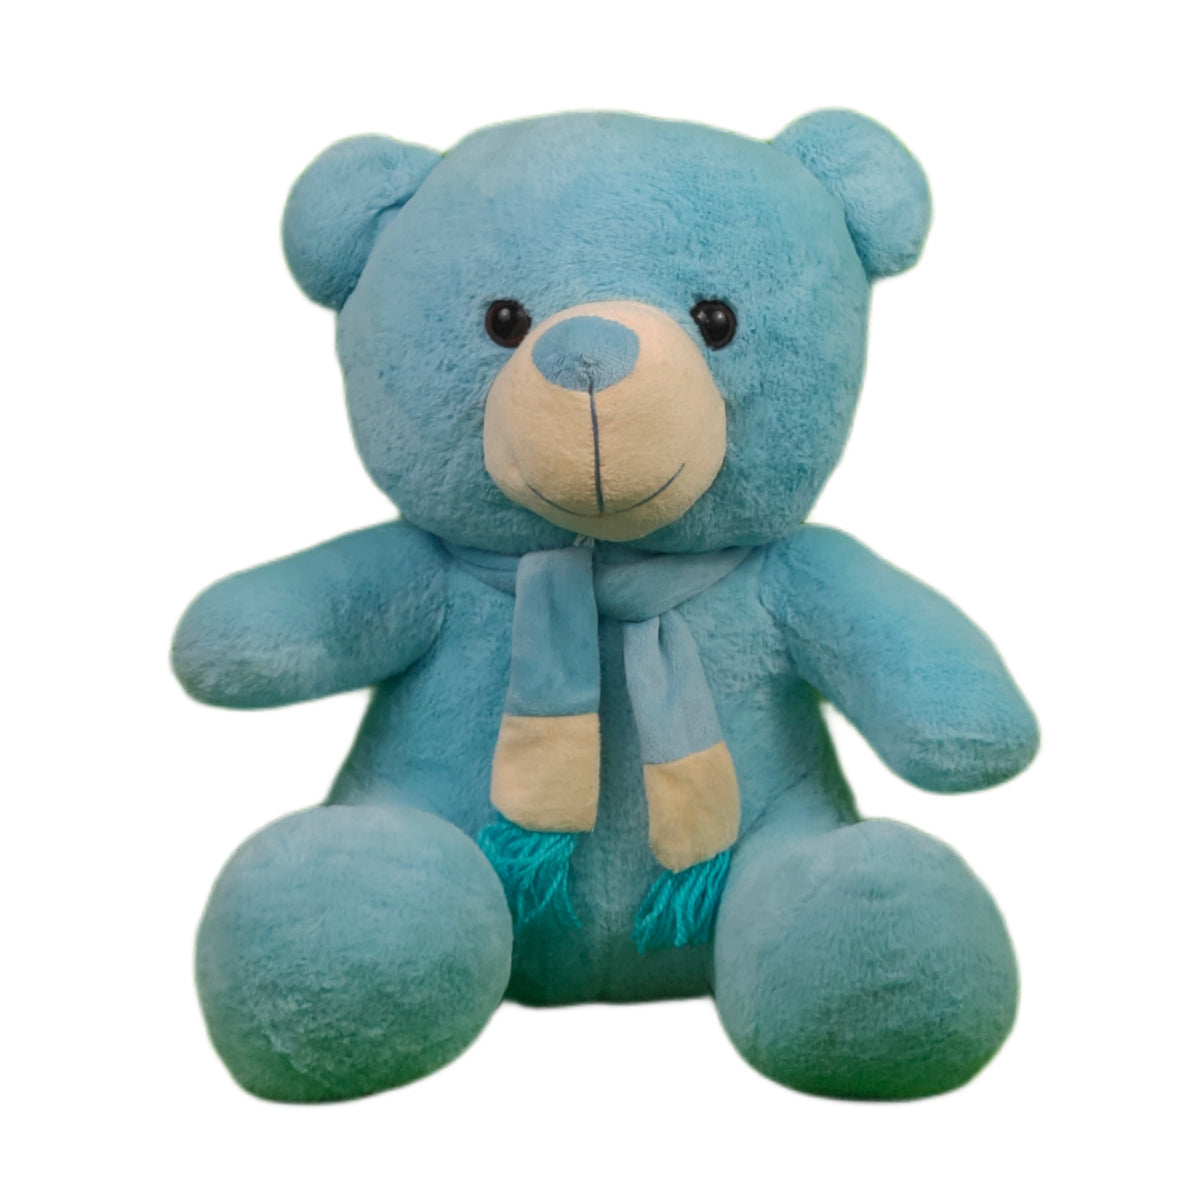 Play Hour Teddy Bear Plush Soft Toy with Muffler for Ages 3 Years and Up - Sky, 40cm